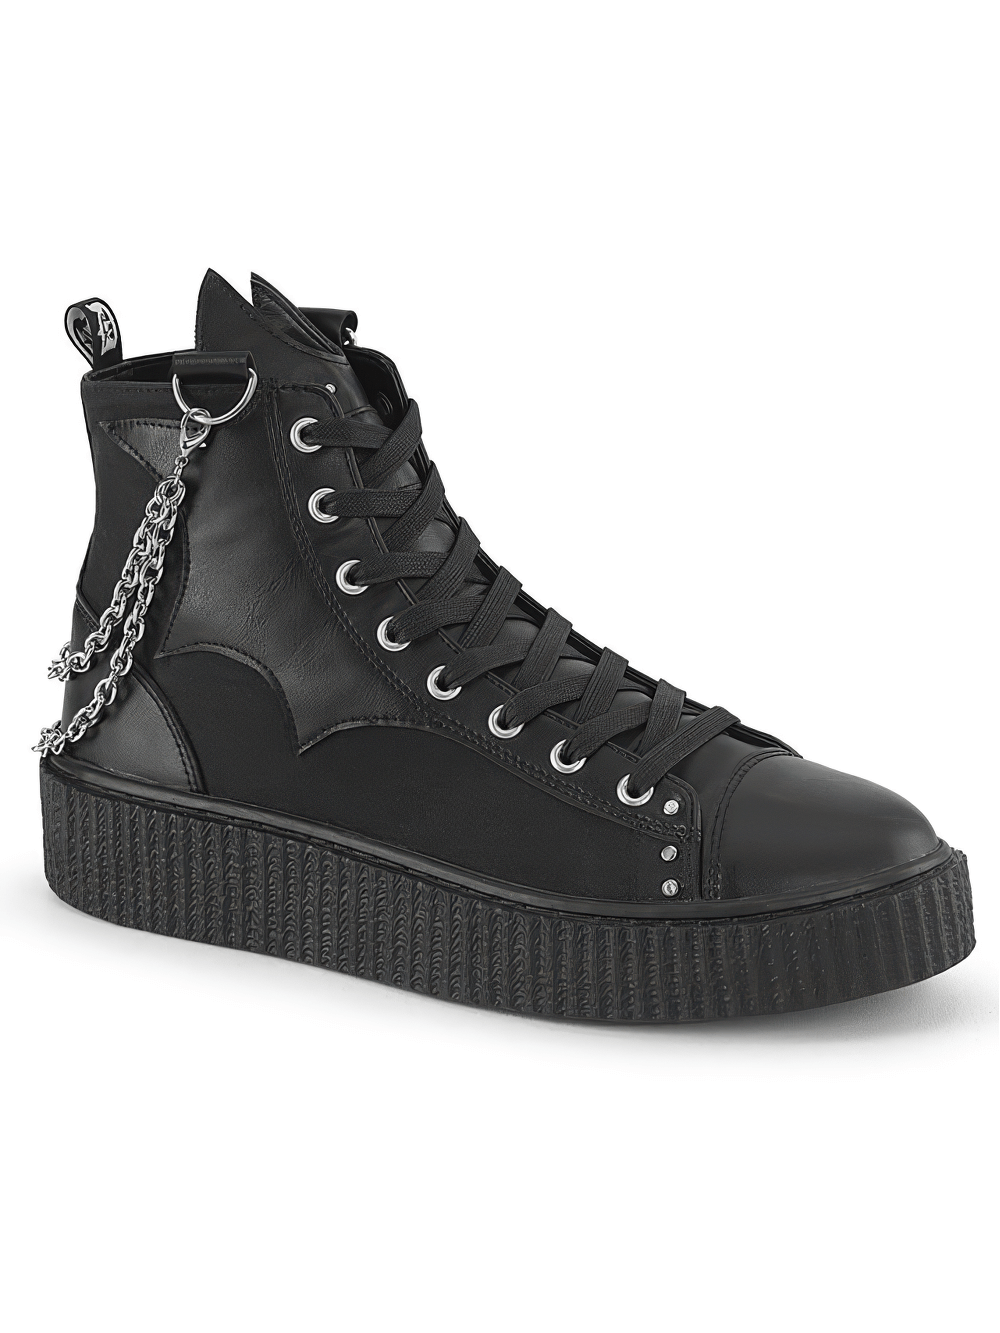 DEMONIA Gothic High-Top Sneakers with Bat Details